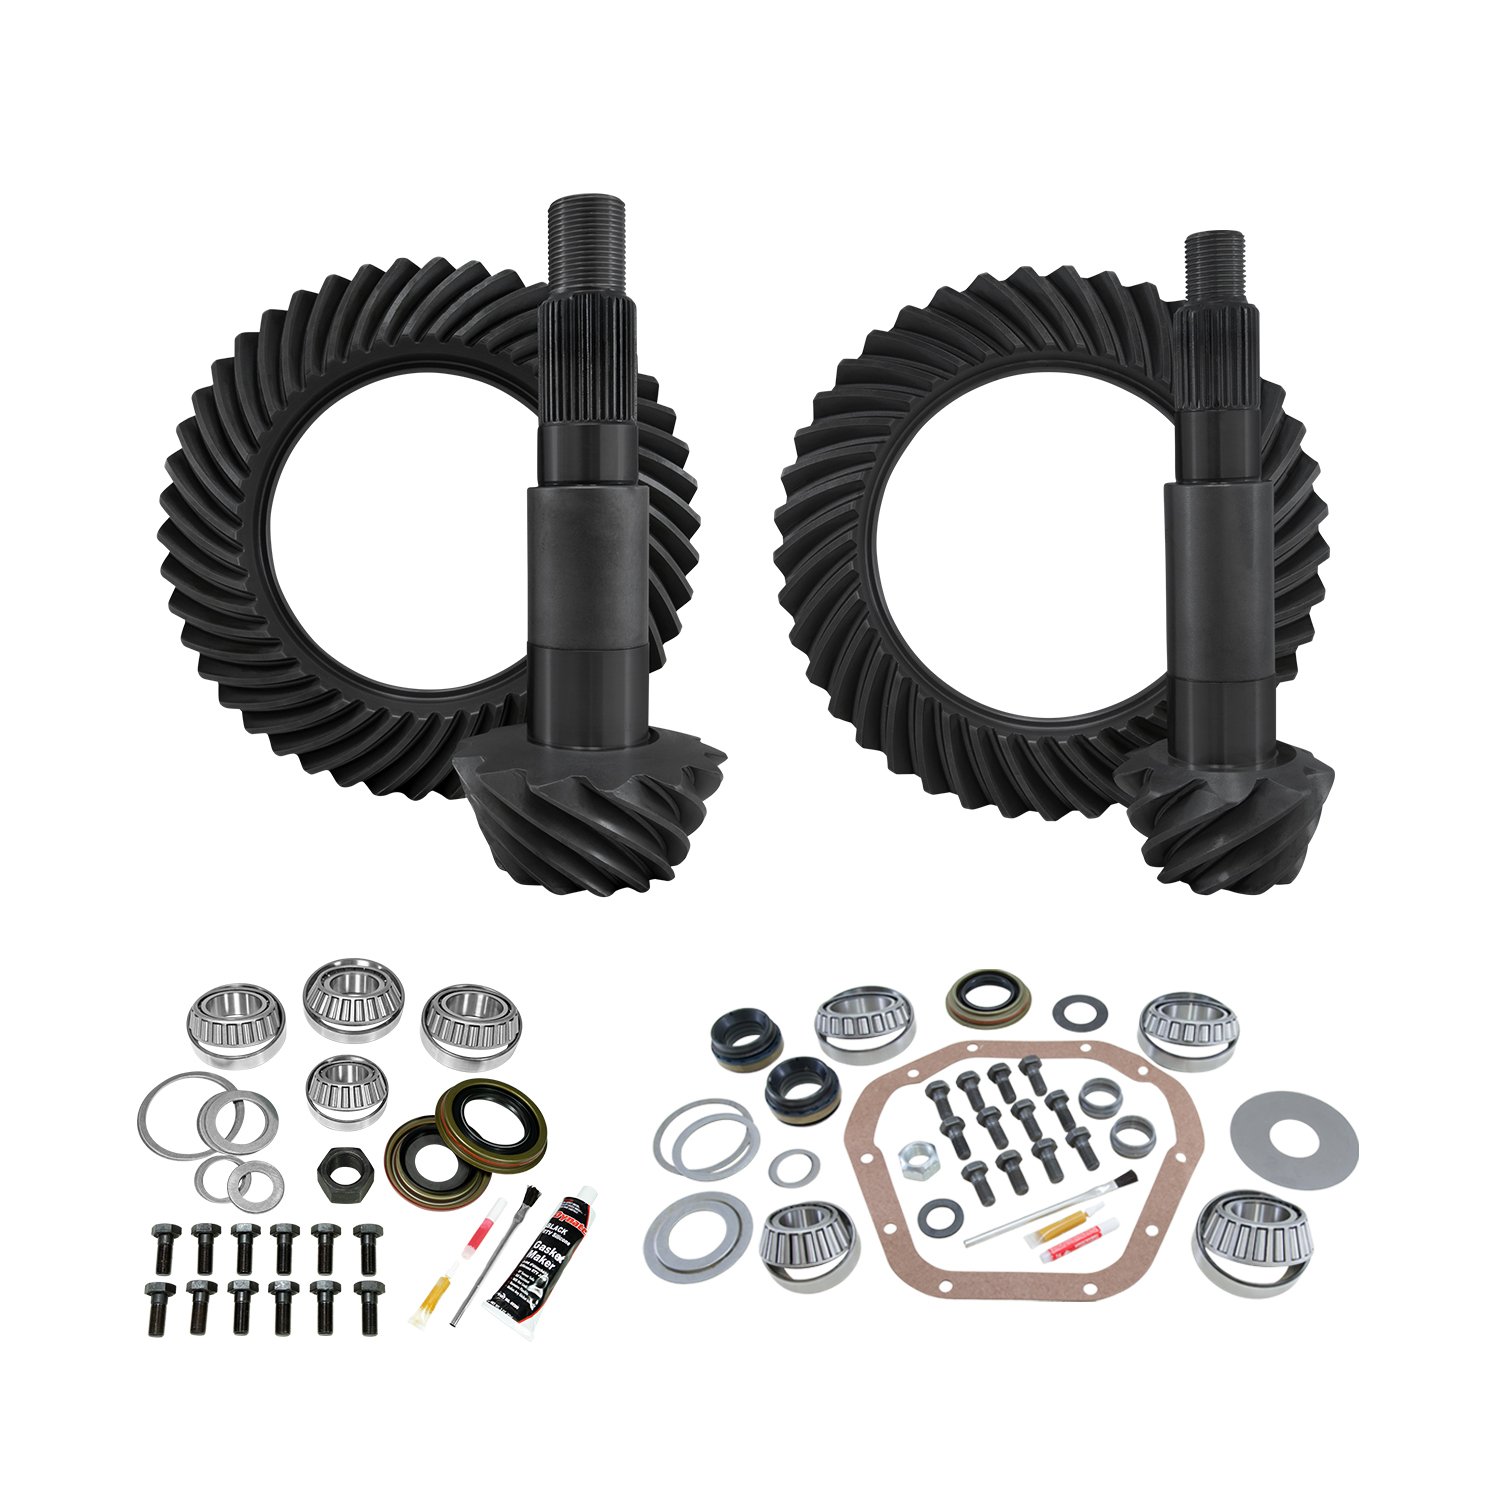 Re-Gear & Install Kit, D60 Reverse/Thick Front, D80 Rear, Ford F350, 4.30